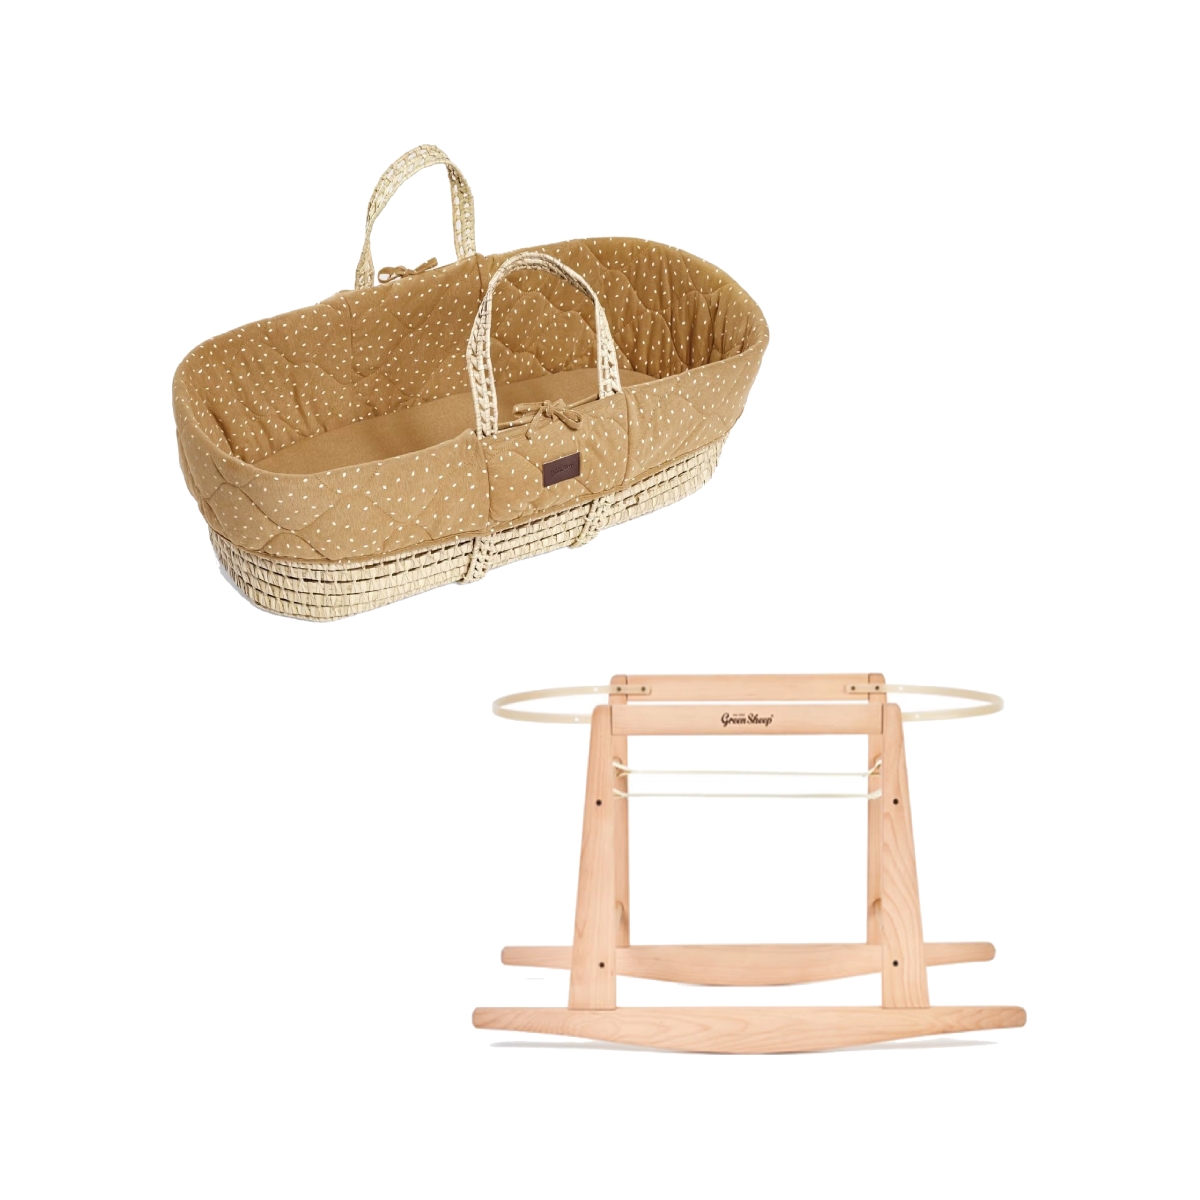 The Little Green Sheep Natural Quilted Moses Basket & Rocking Stand Bundle